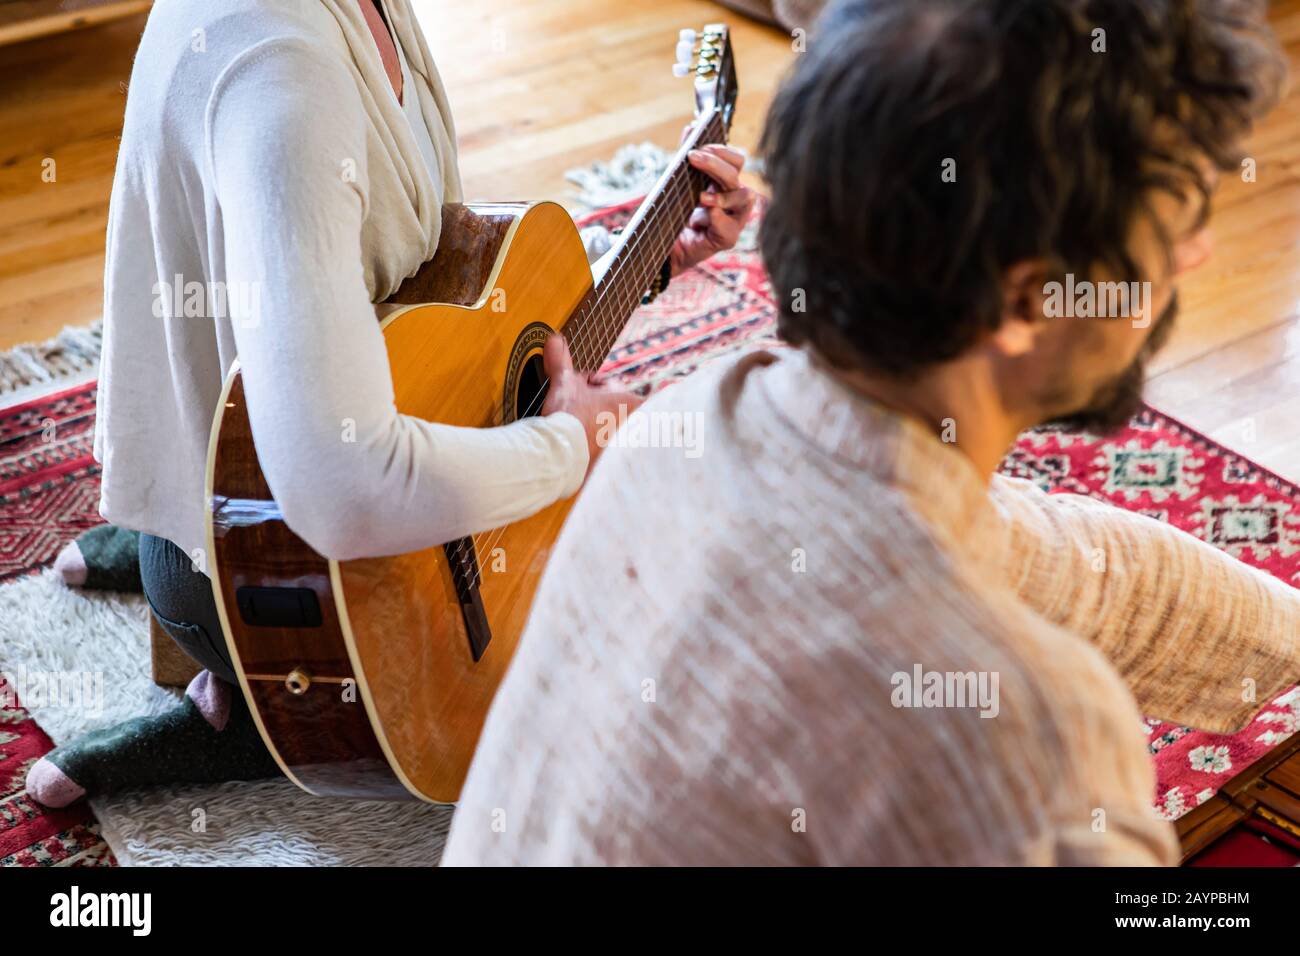 Young shamanic woman playing classical guitar while sitting besides man playing harmonium together as sacred music for meditation in room Stock Photo